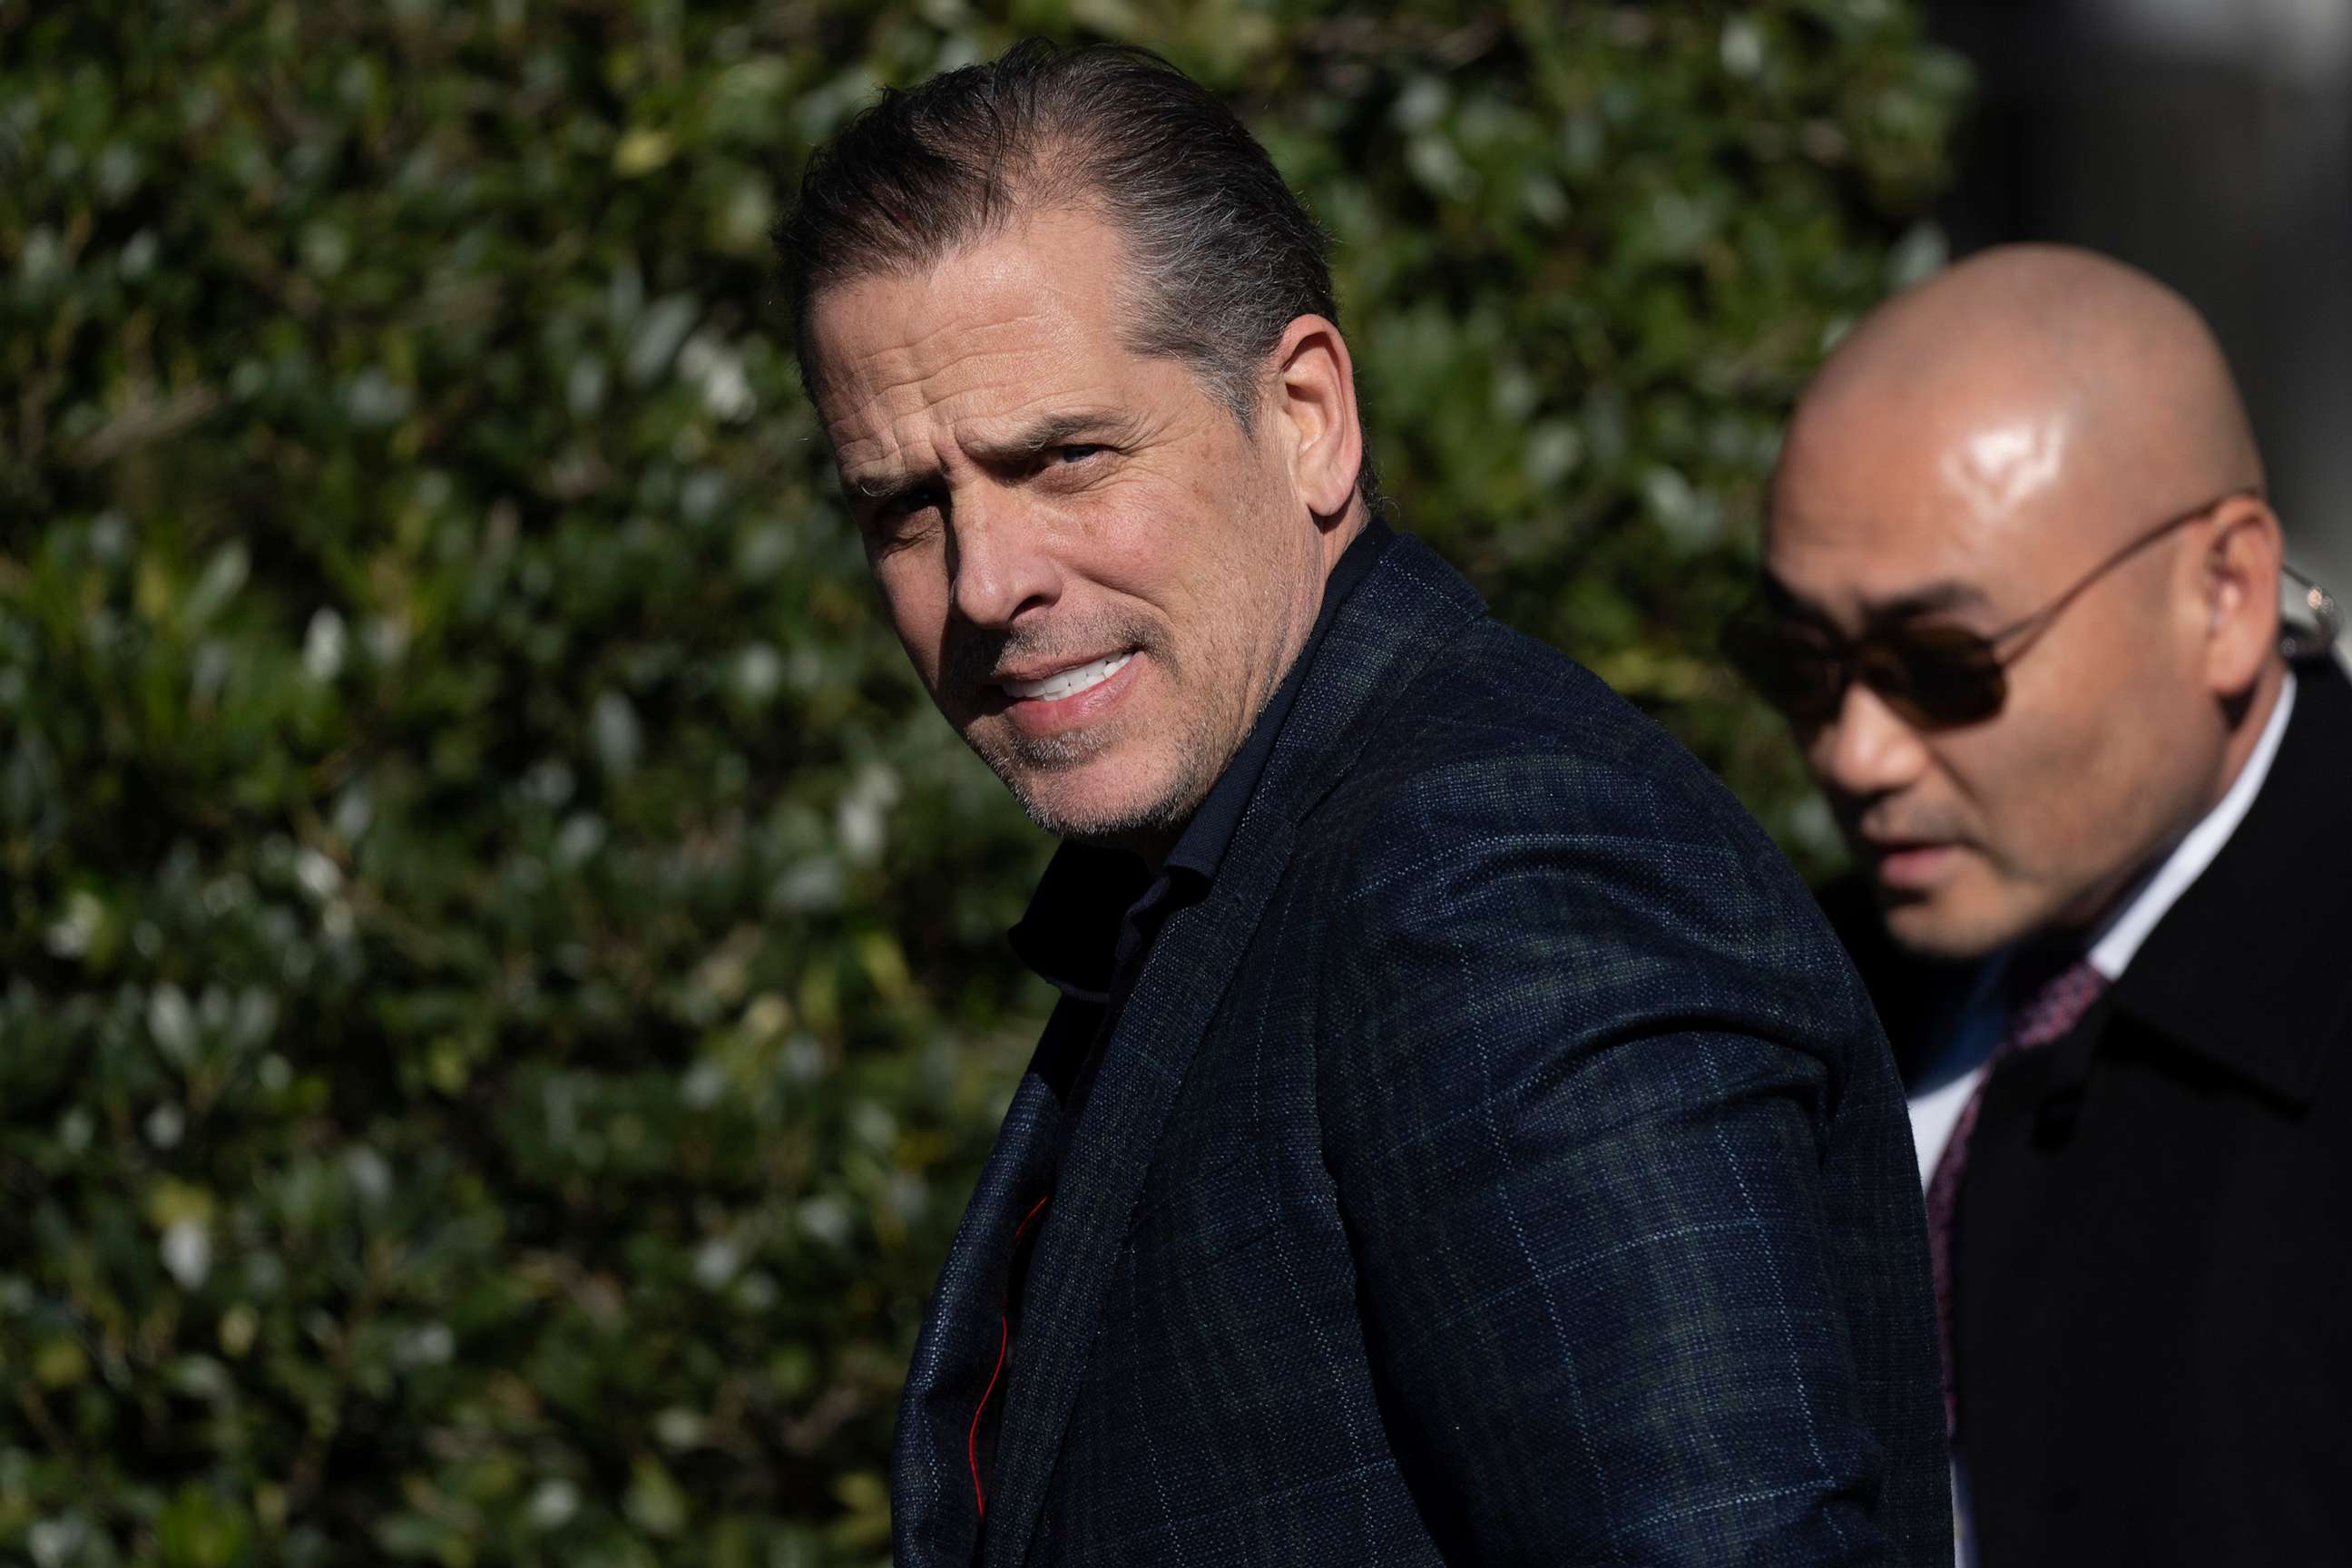 PHOTO: In this Nov. 21, 2022, file photo, Hunter Biden walks along the South Lawn at the White House in Washington, D.C.